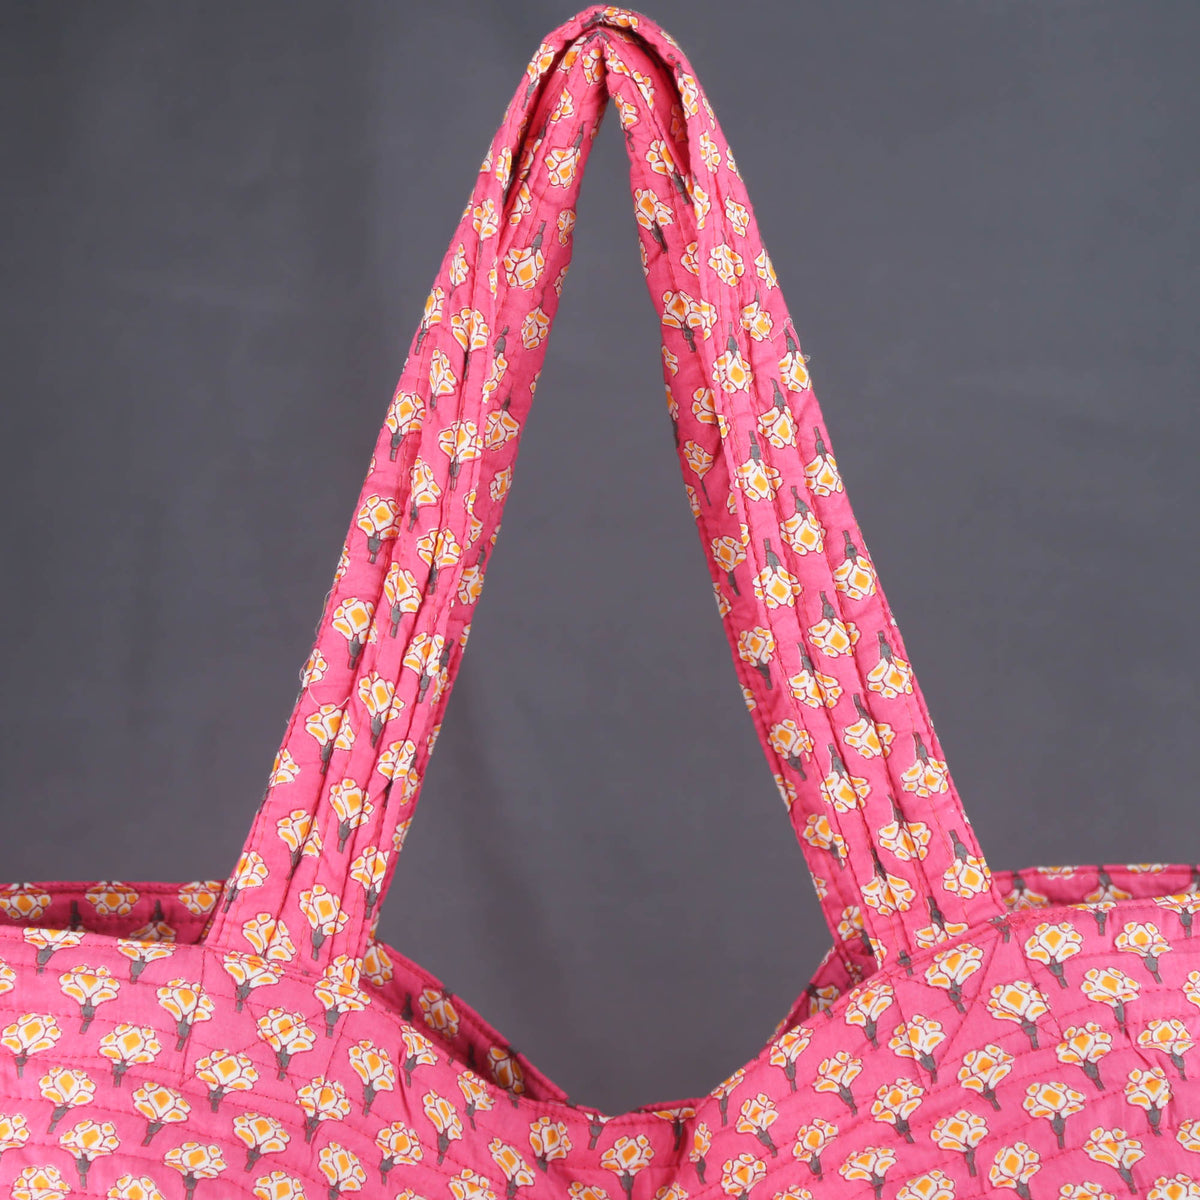 Cotton Quilted Large Shoppping / Beach Bag - Yellow Flowers On Pink